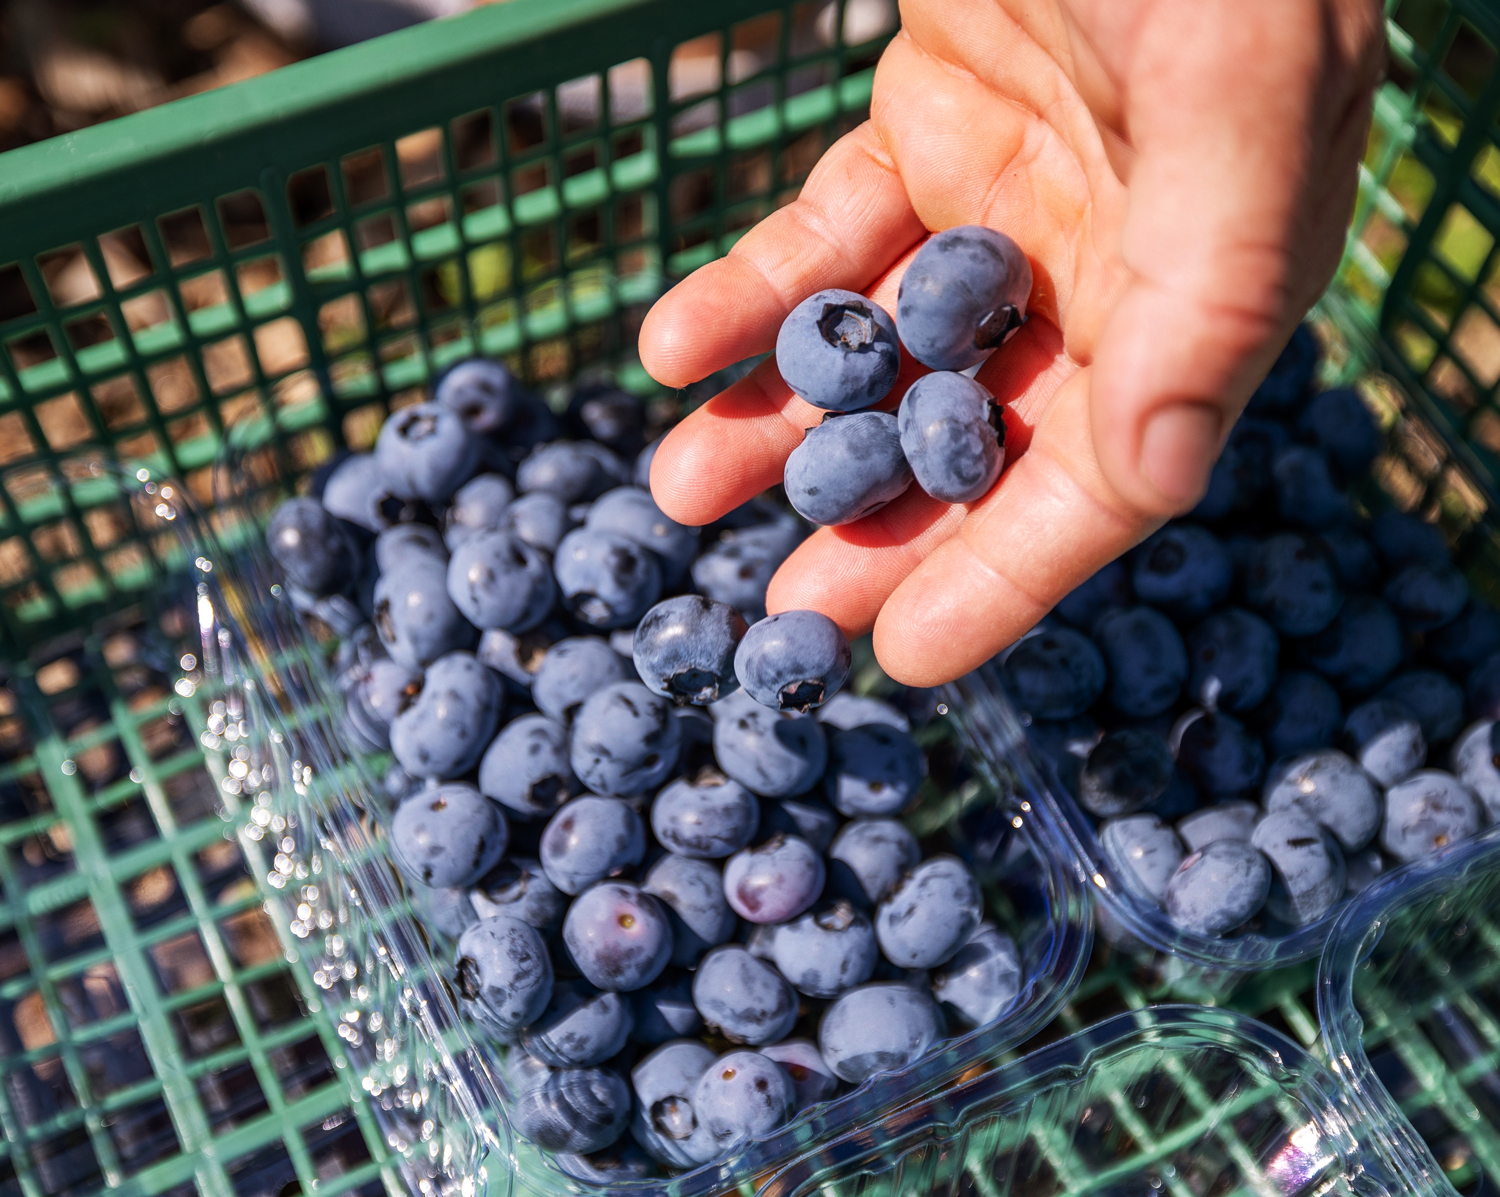 Image of hand dropping Always Fresh blueberries into a basket.